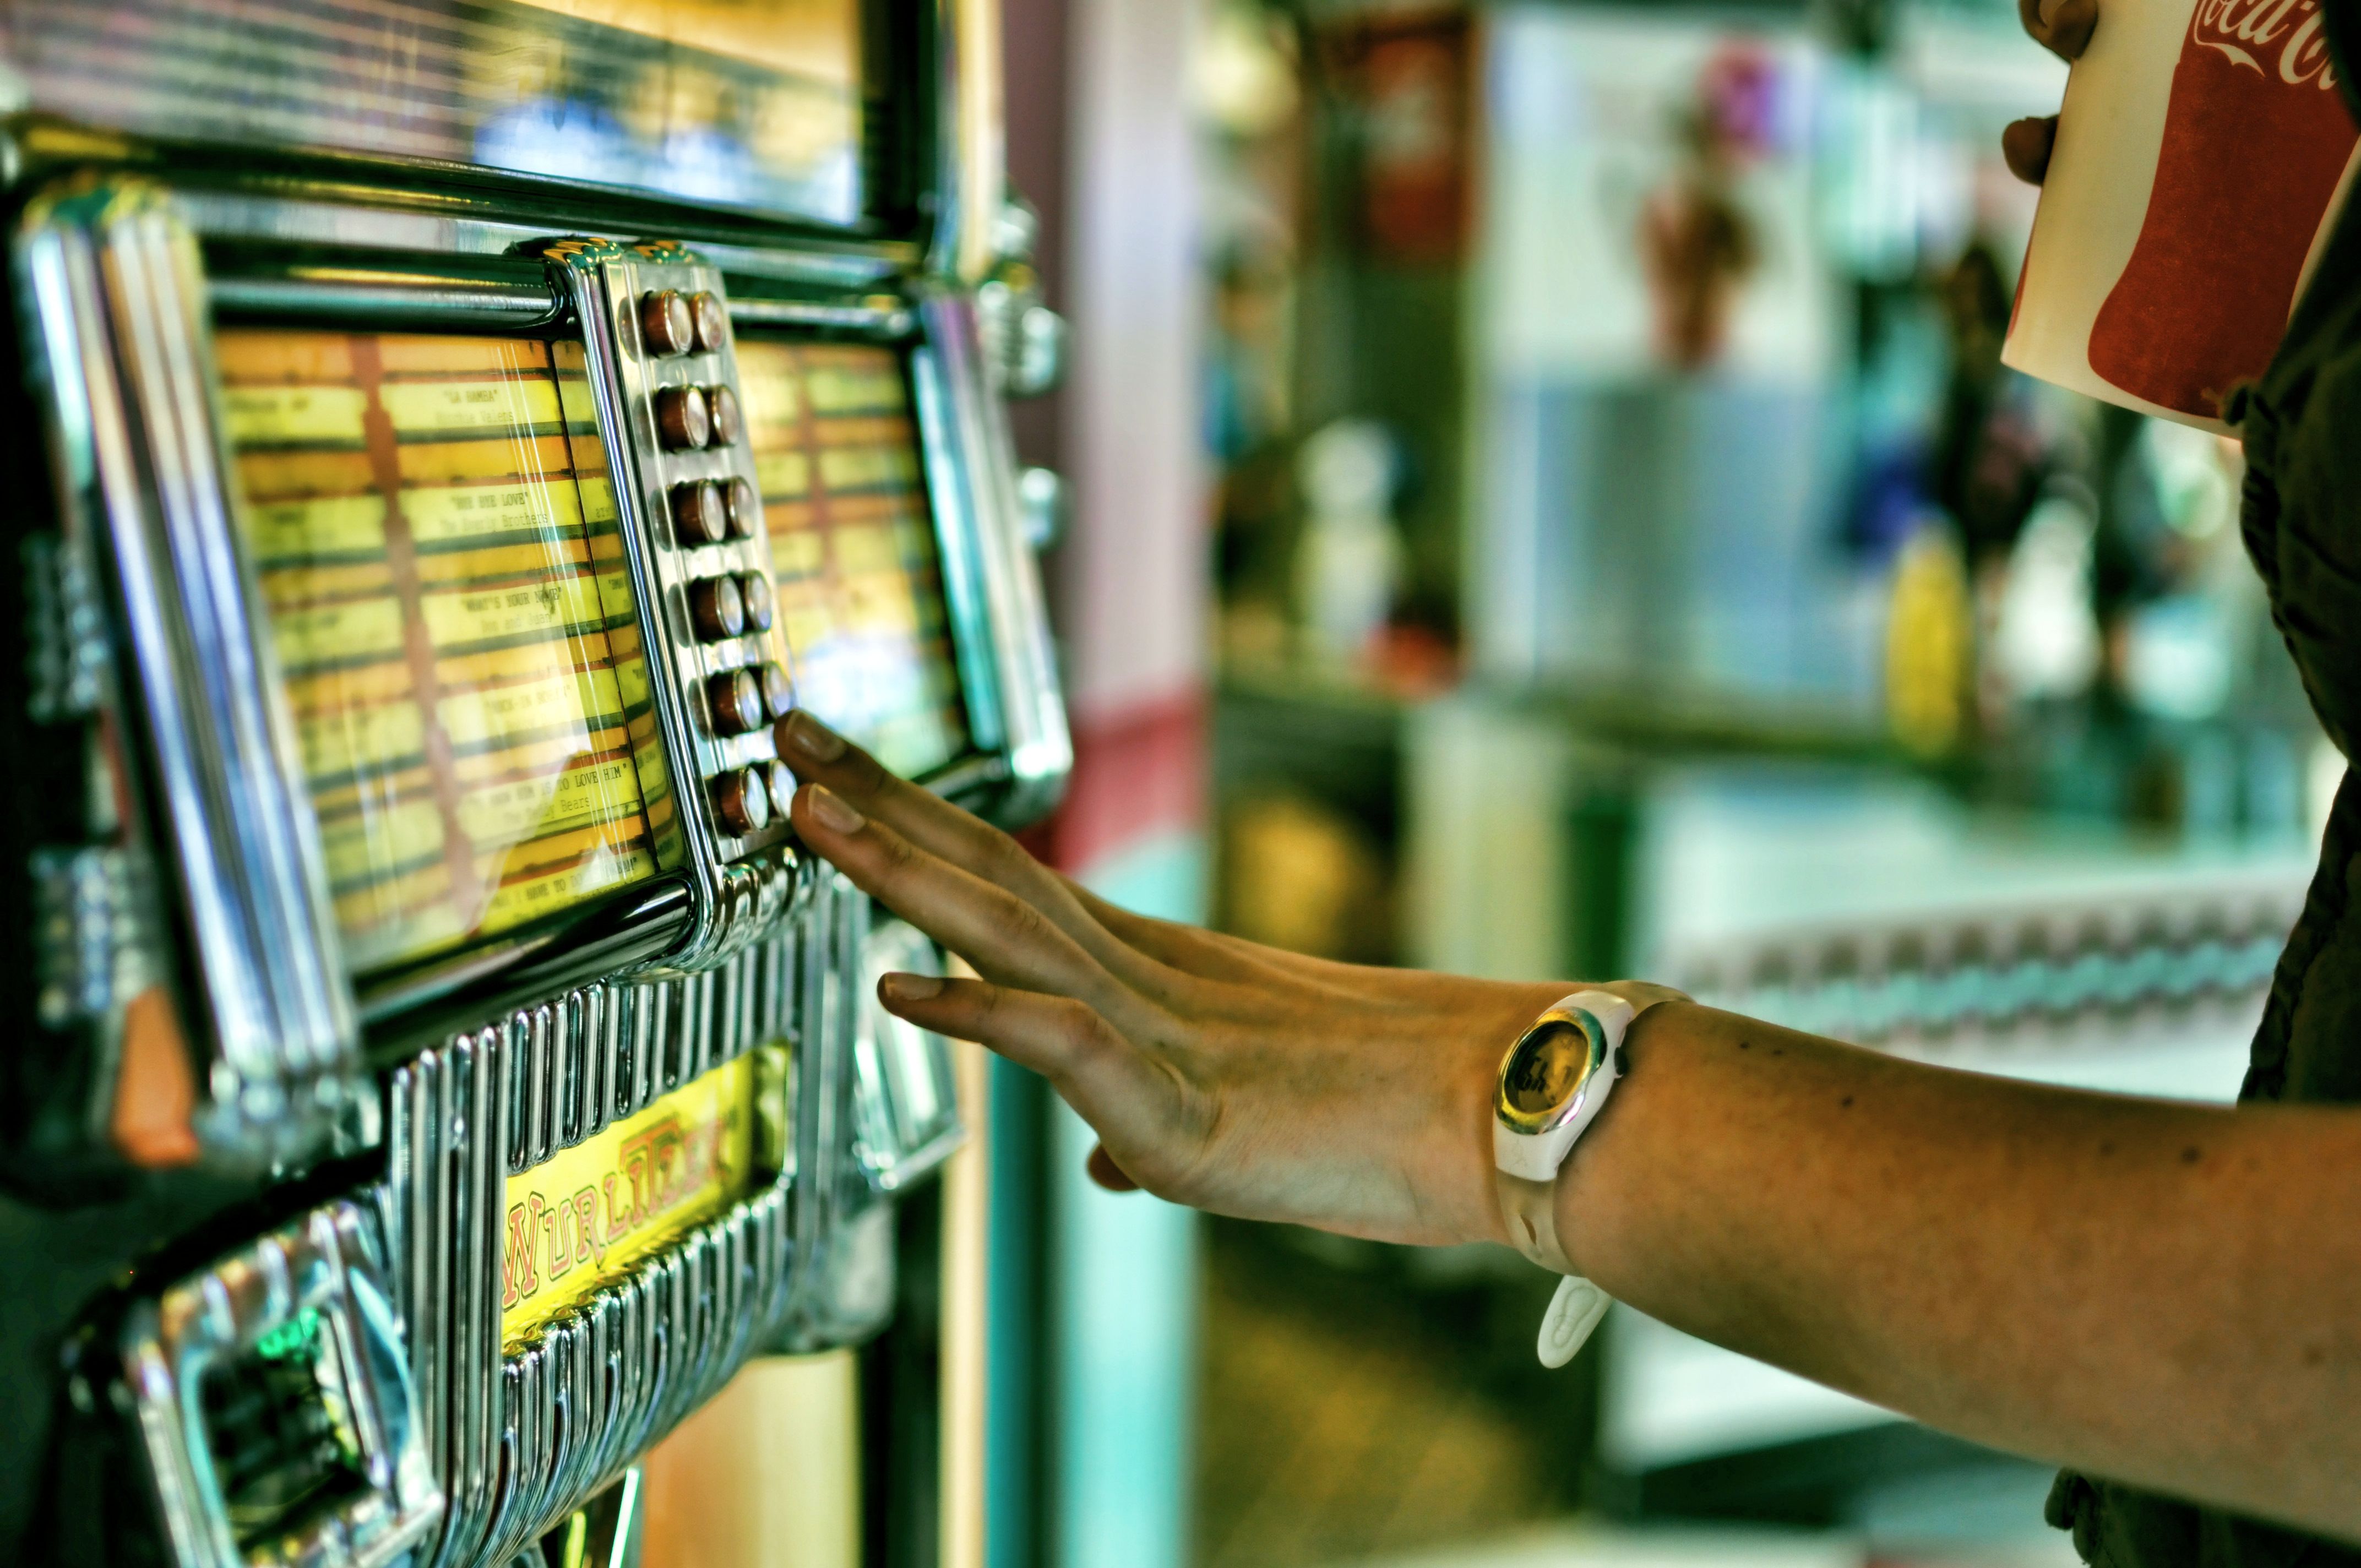 How The Jukebox Got Its Groove